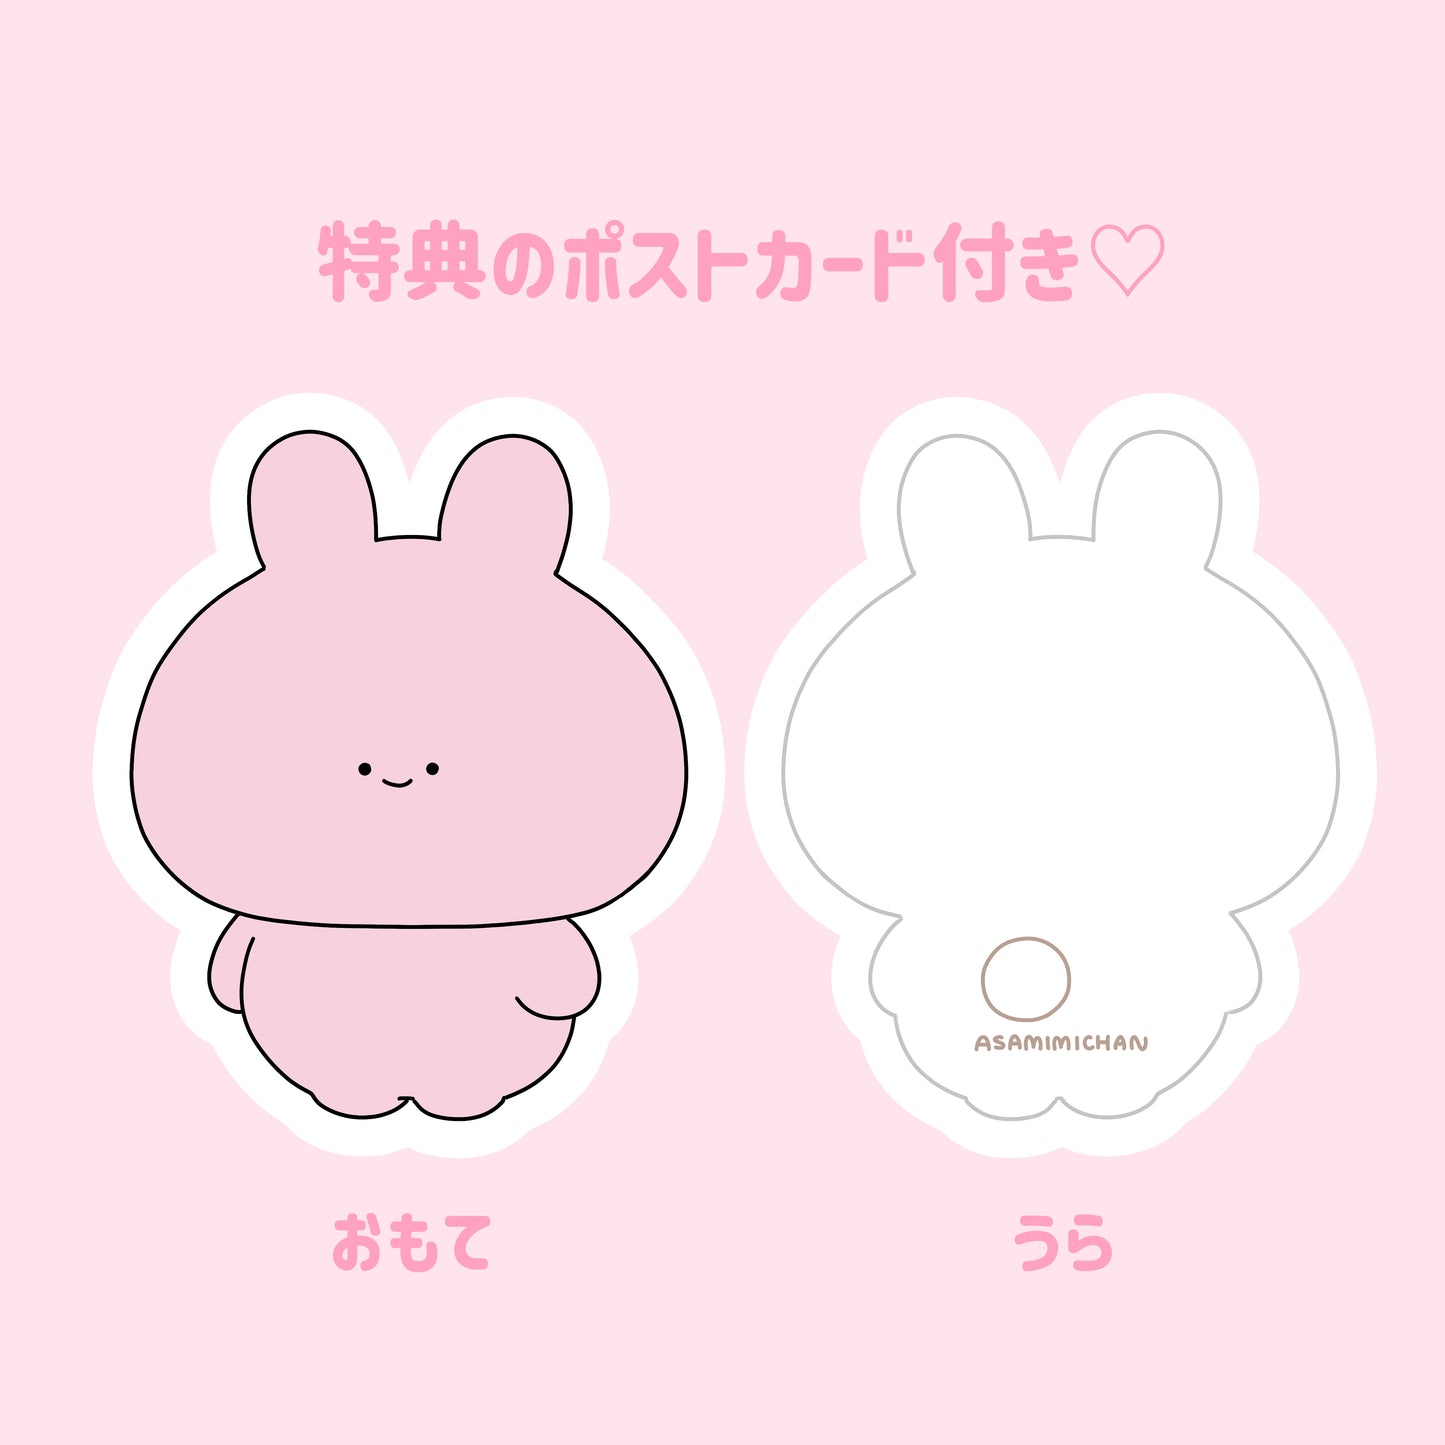 [Asamimi-chan] Everyone together set (ANEMIMI HAPPY BIRTHDAY🐰💜) [Limited quantity]